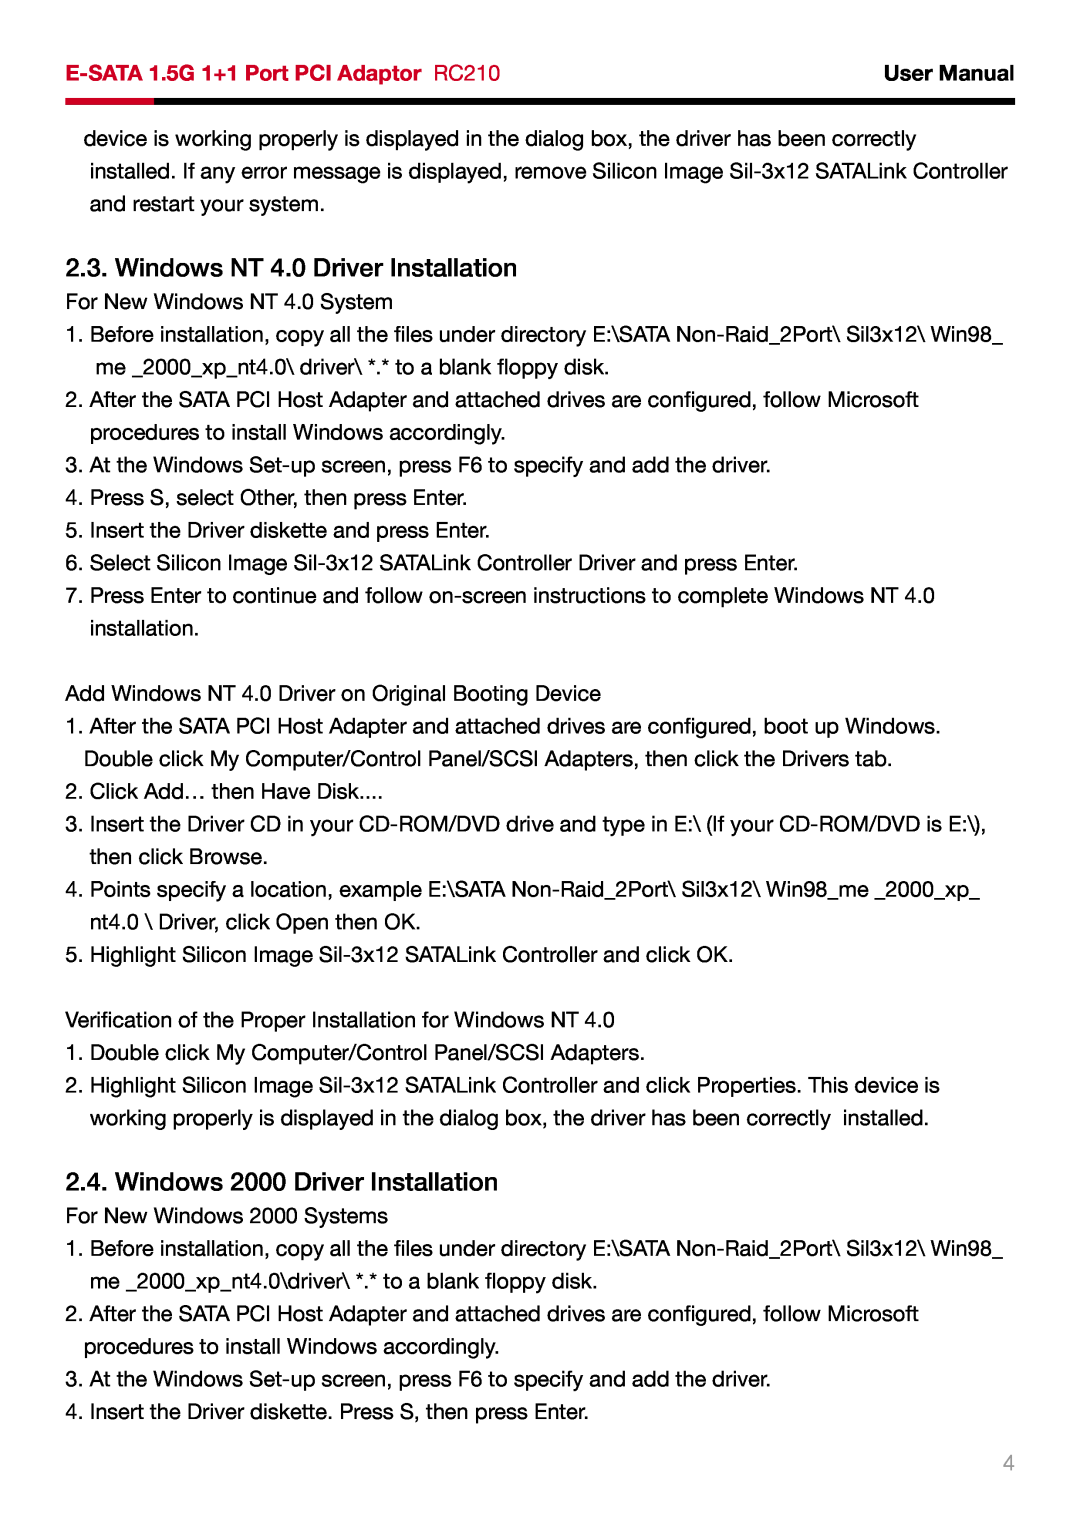 Rosewill RC210 user manual Windows NT 4.0 Driver Installation, Windows 2000 Driver Installation, User Manual 